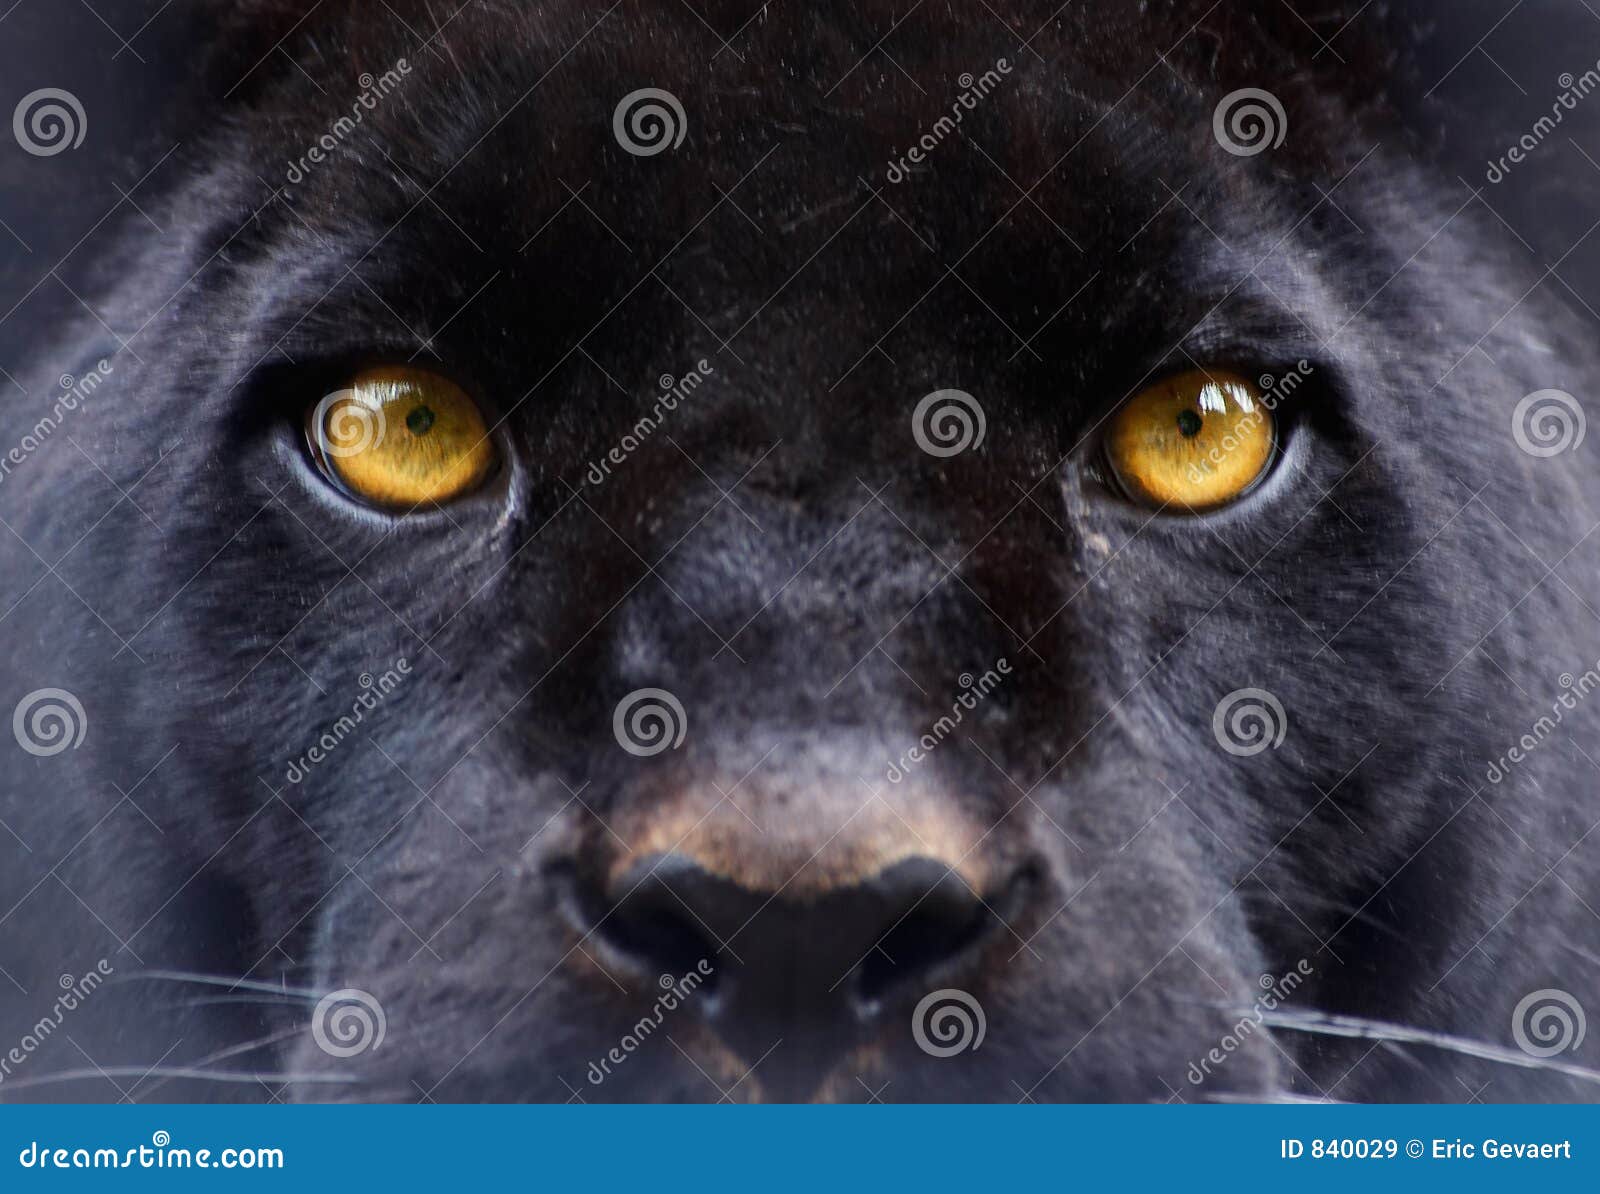 the eyes of a black panther